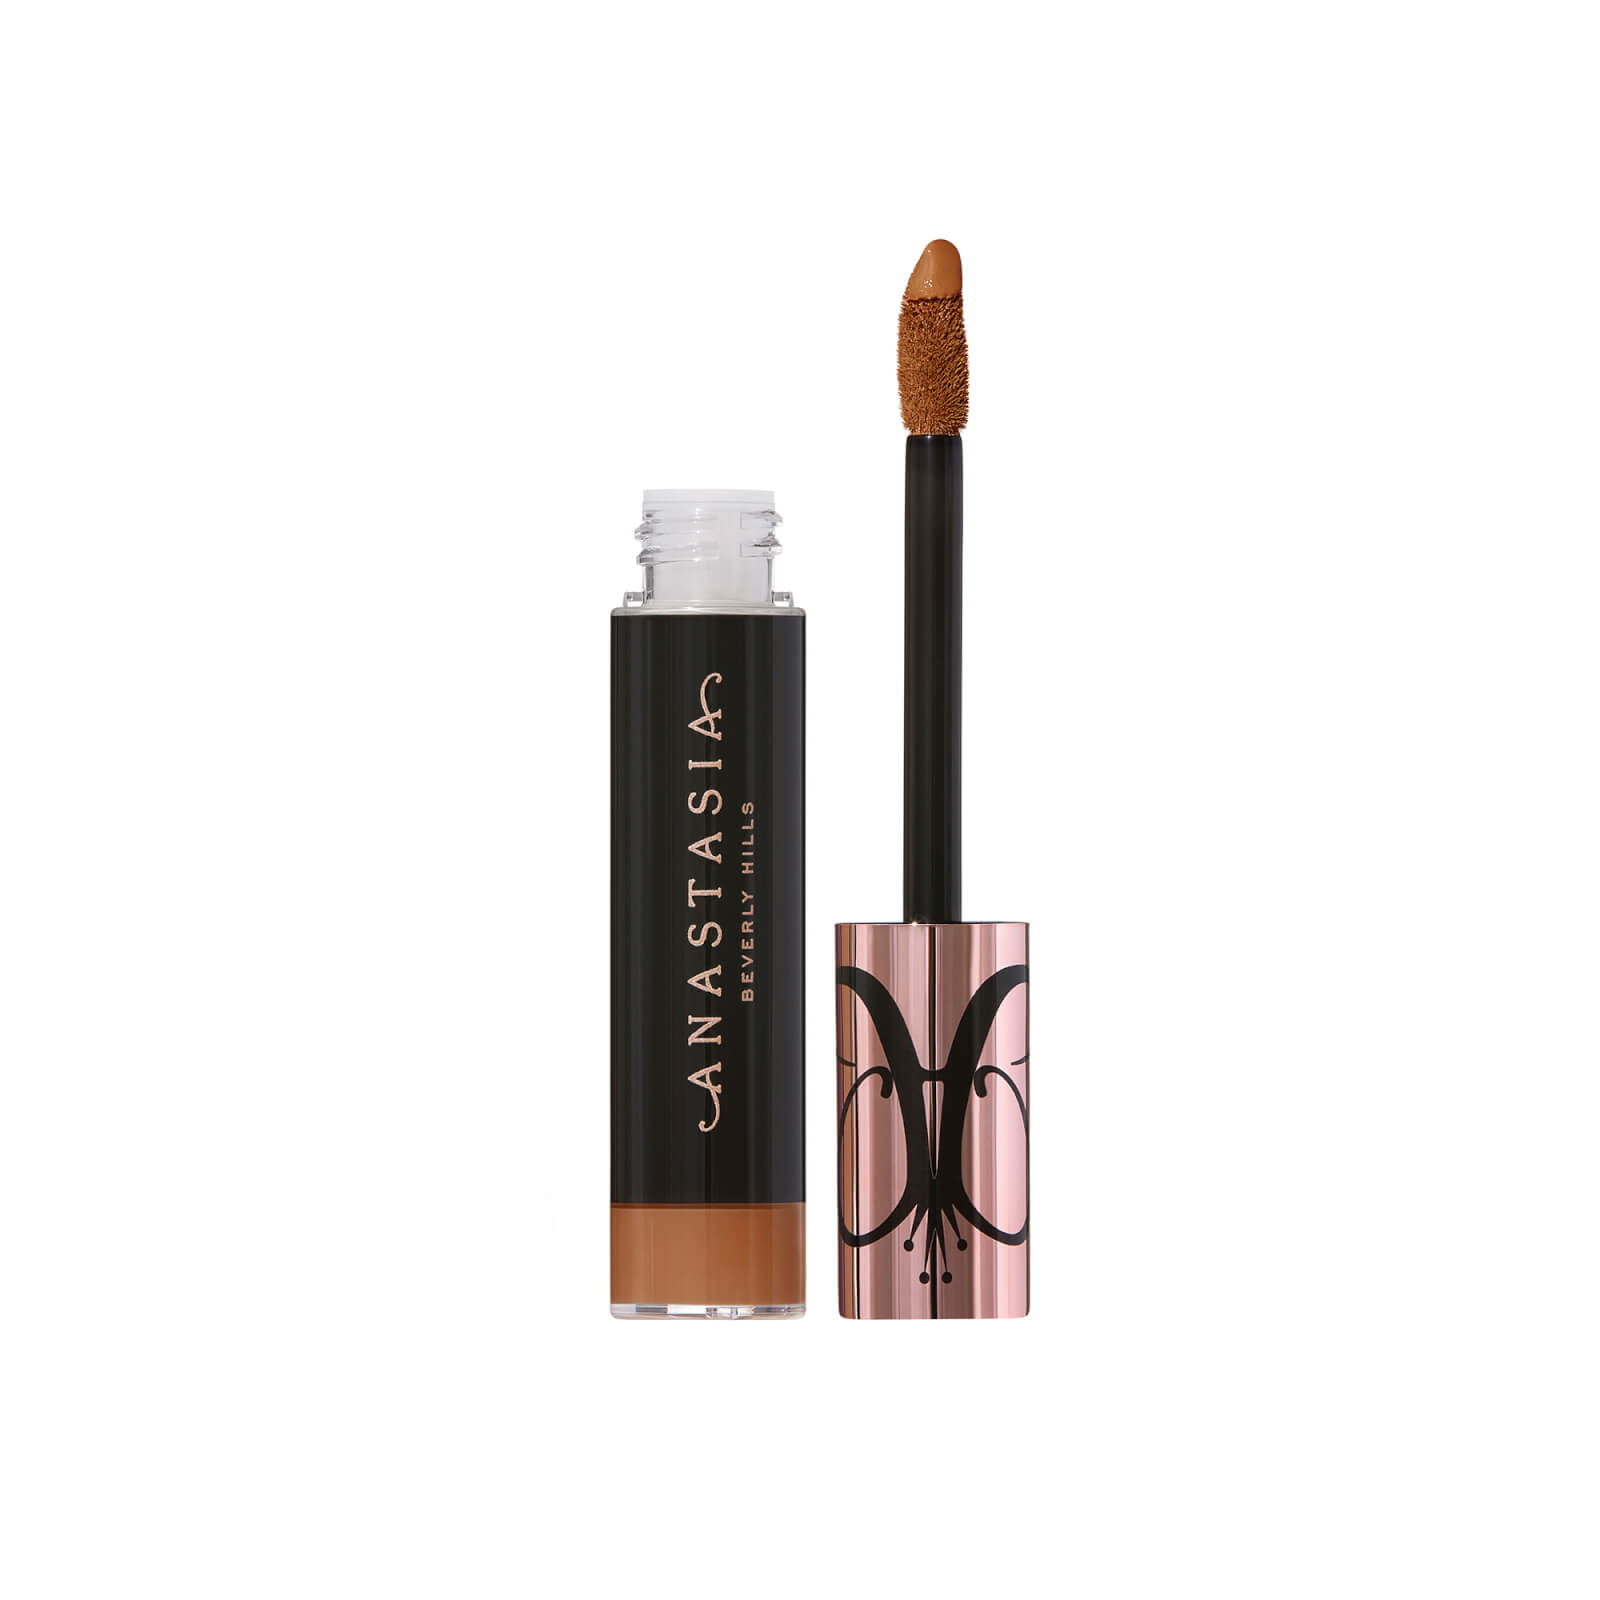 Anastasia Beverly Hills Magic Touch Concealer 12ml (Various Shades) - 22